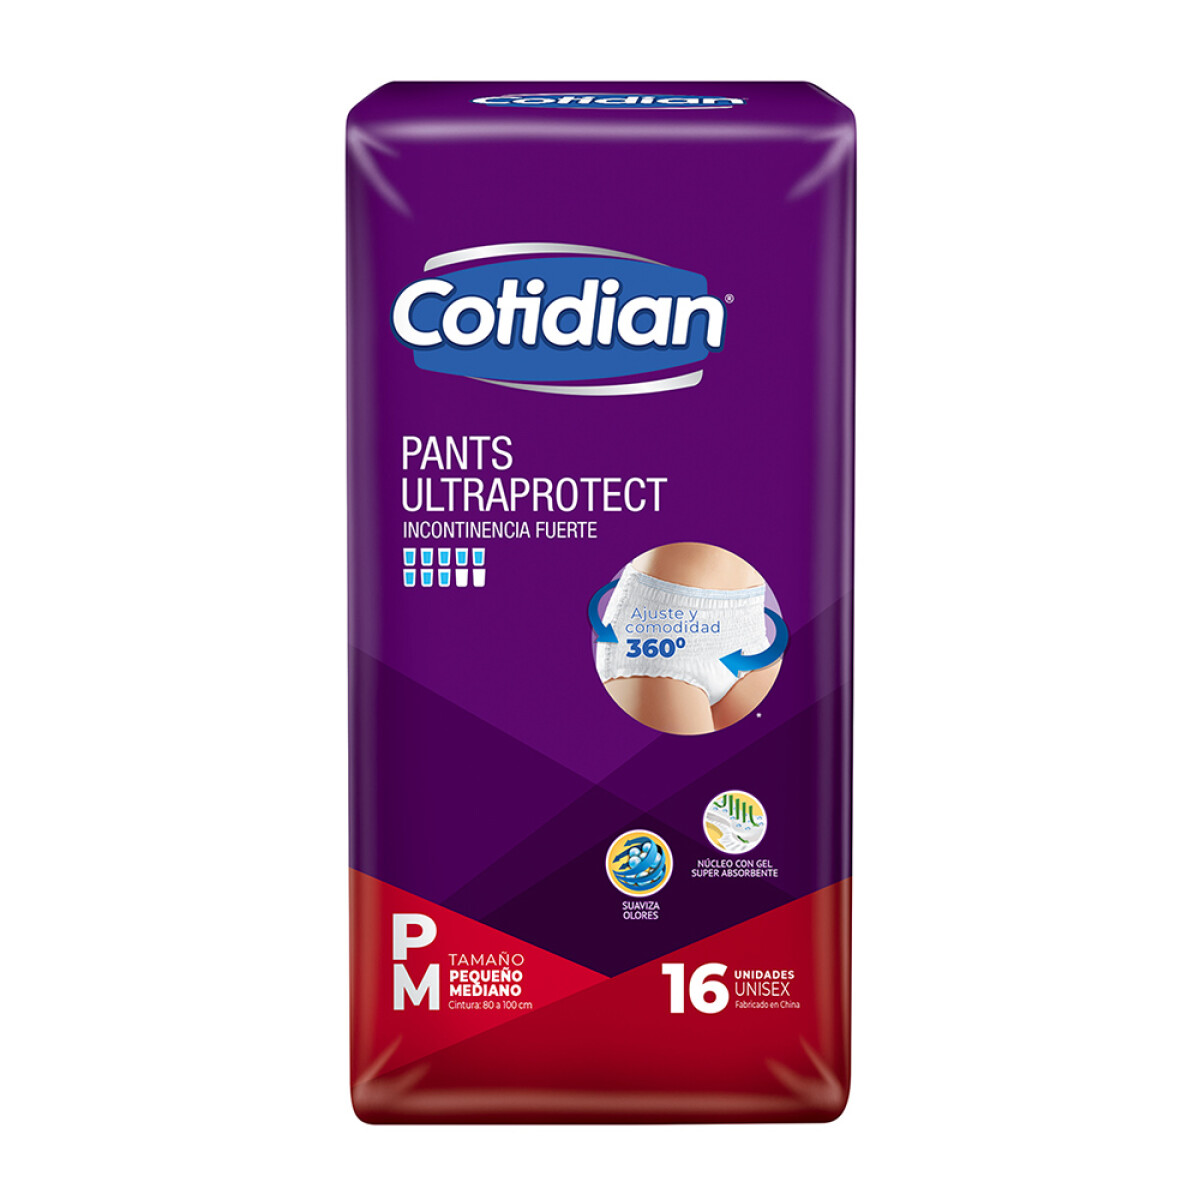 Pants Cotidian Ultraprotect Talle M 16 Uds. 